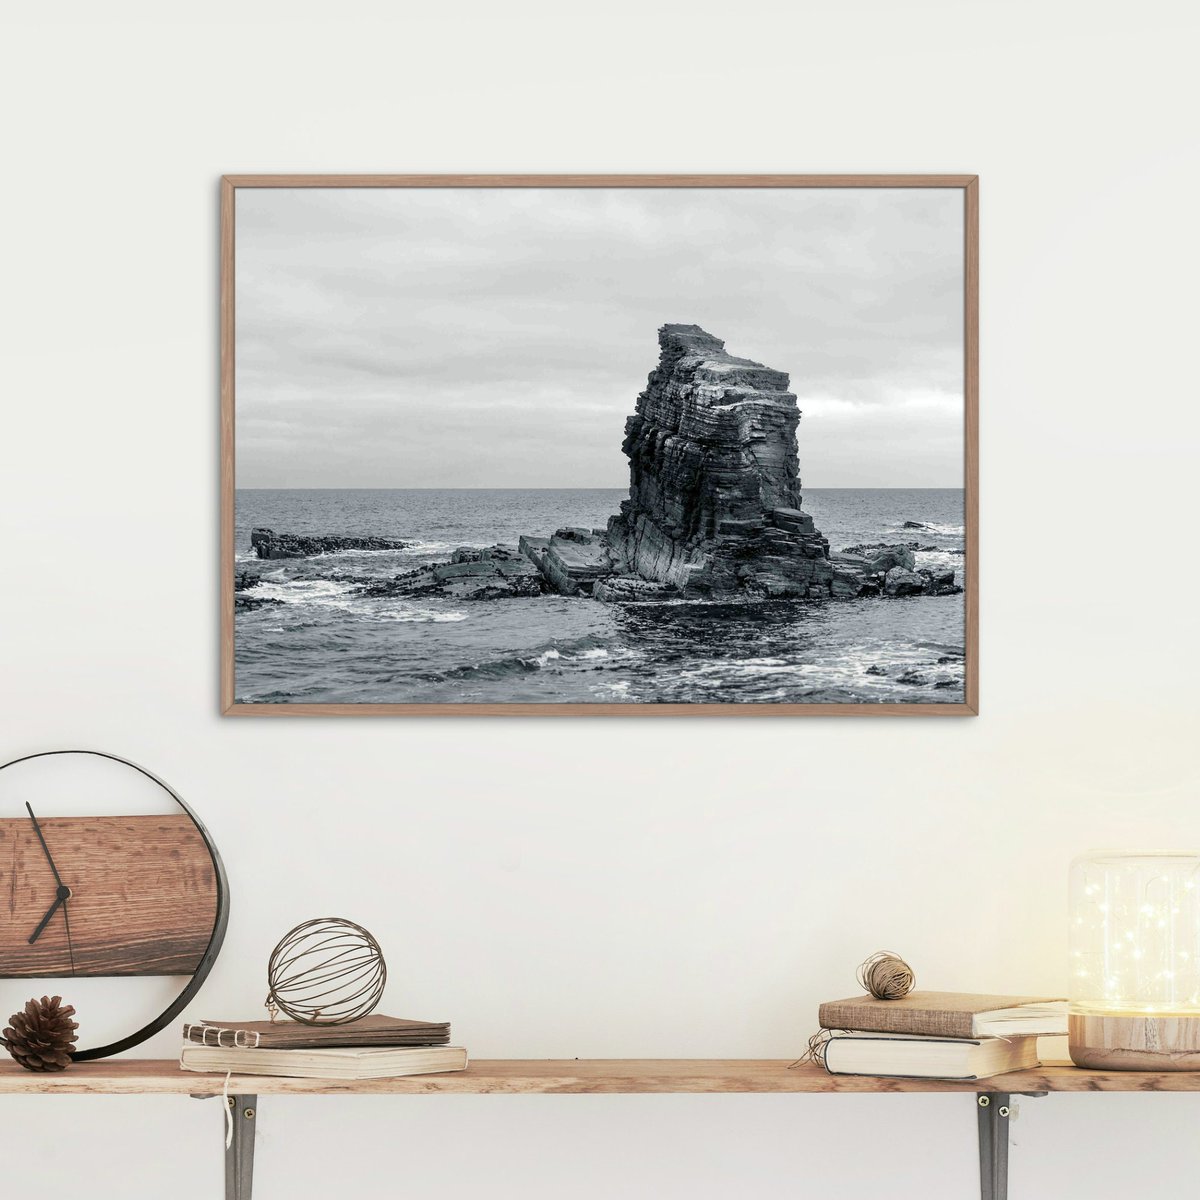 No, you aren't seeing things, this is indeed ANOTHER new listing this week. Stack At Latheronwheel was taken by mum on her recent trip to the rugged Caithness coastline. It's available now from our etsy as 8x10inch print. Head to 100PenniesPhoto.etsy.com to grab yours.